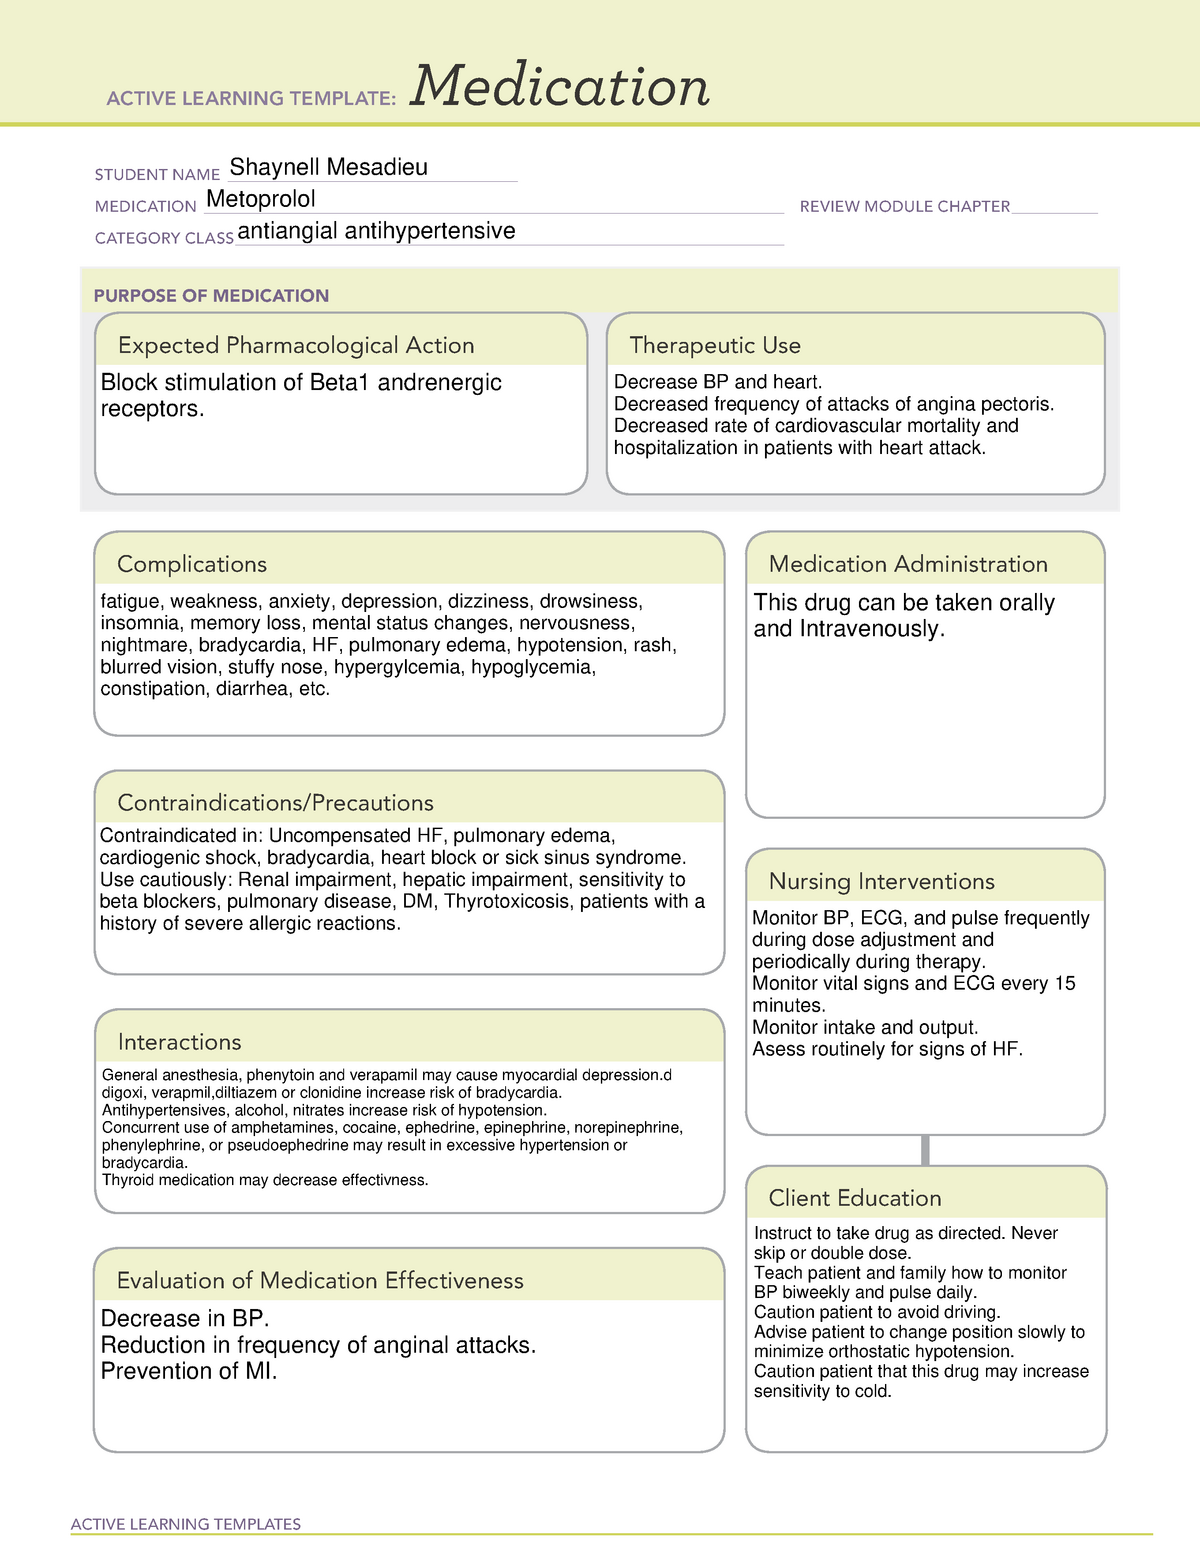 ATI learning template metoprolol clinical ACTIVE LEARNING TEMPLATES